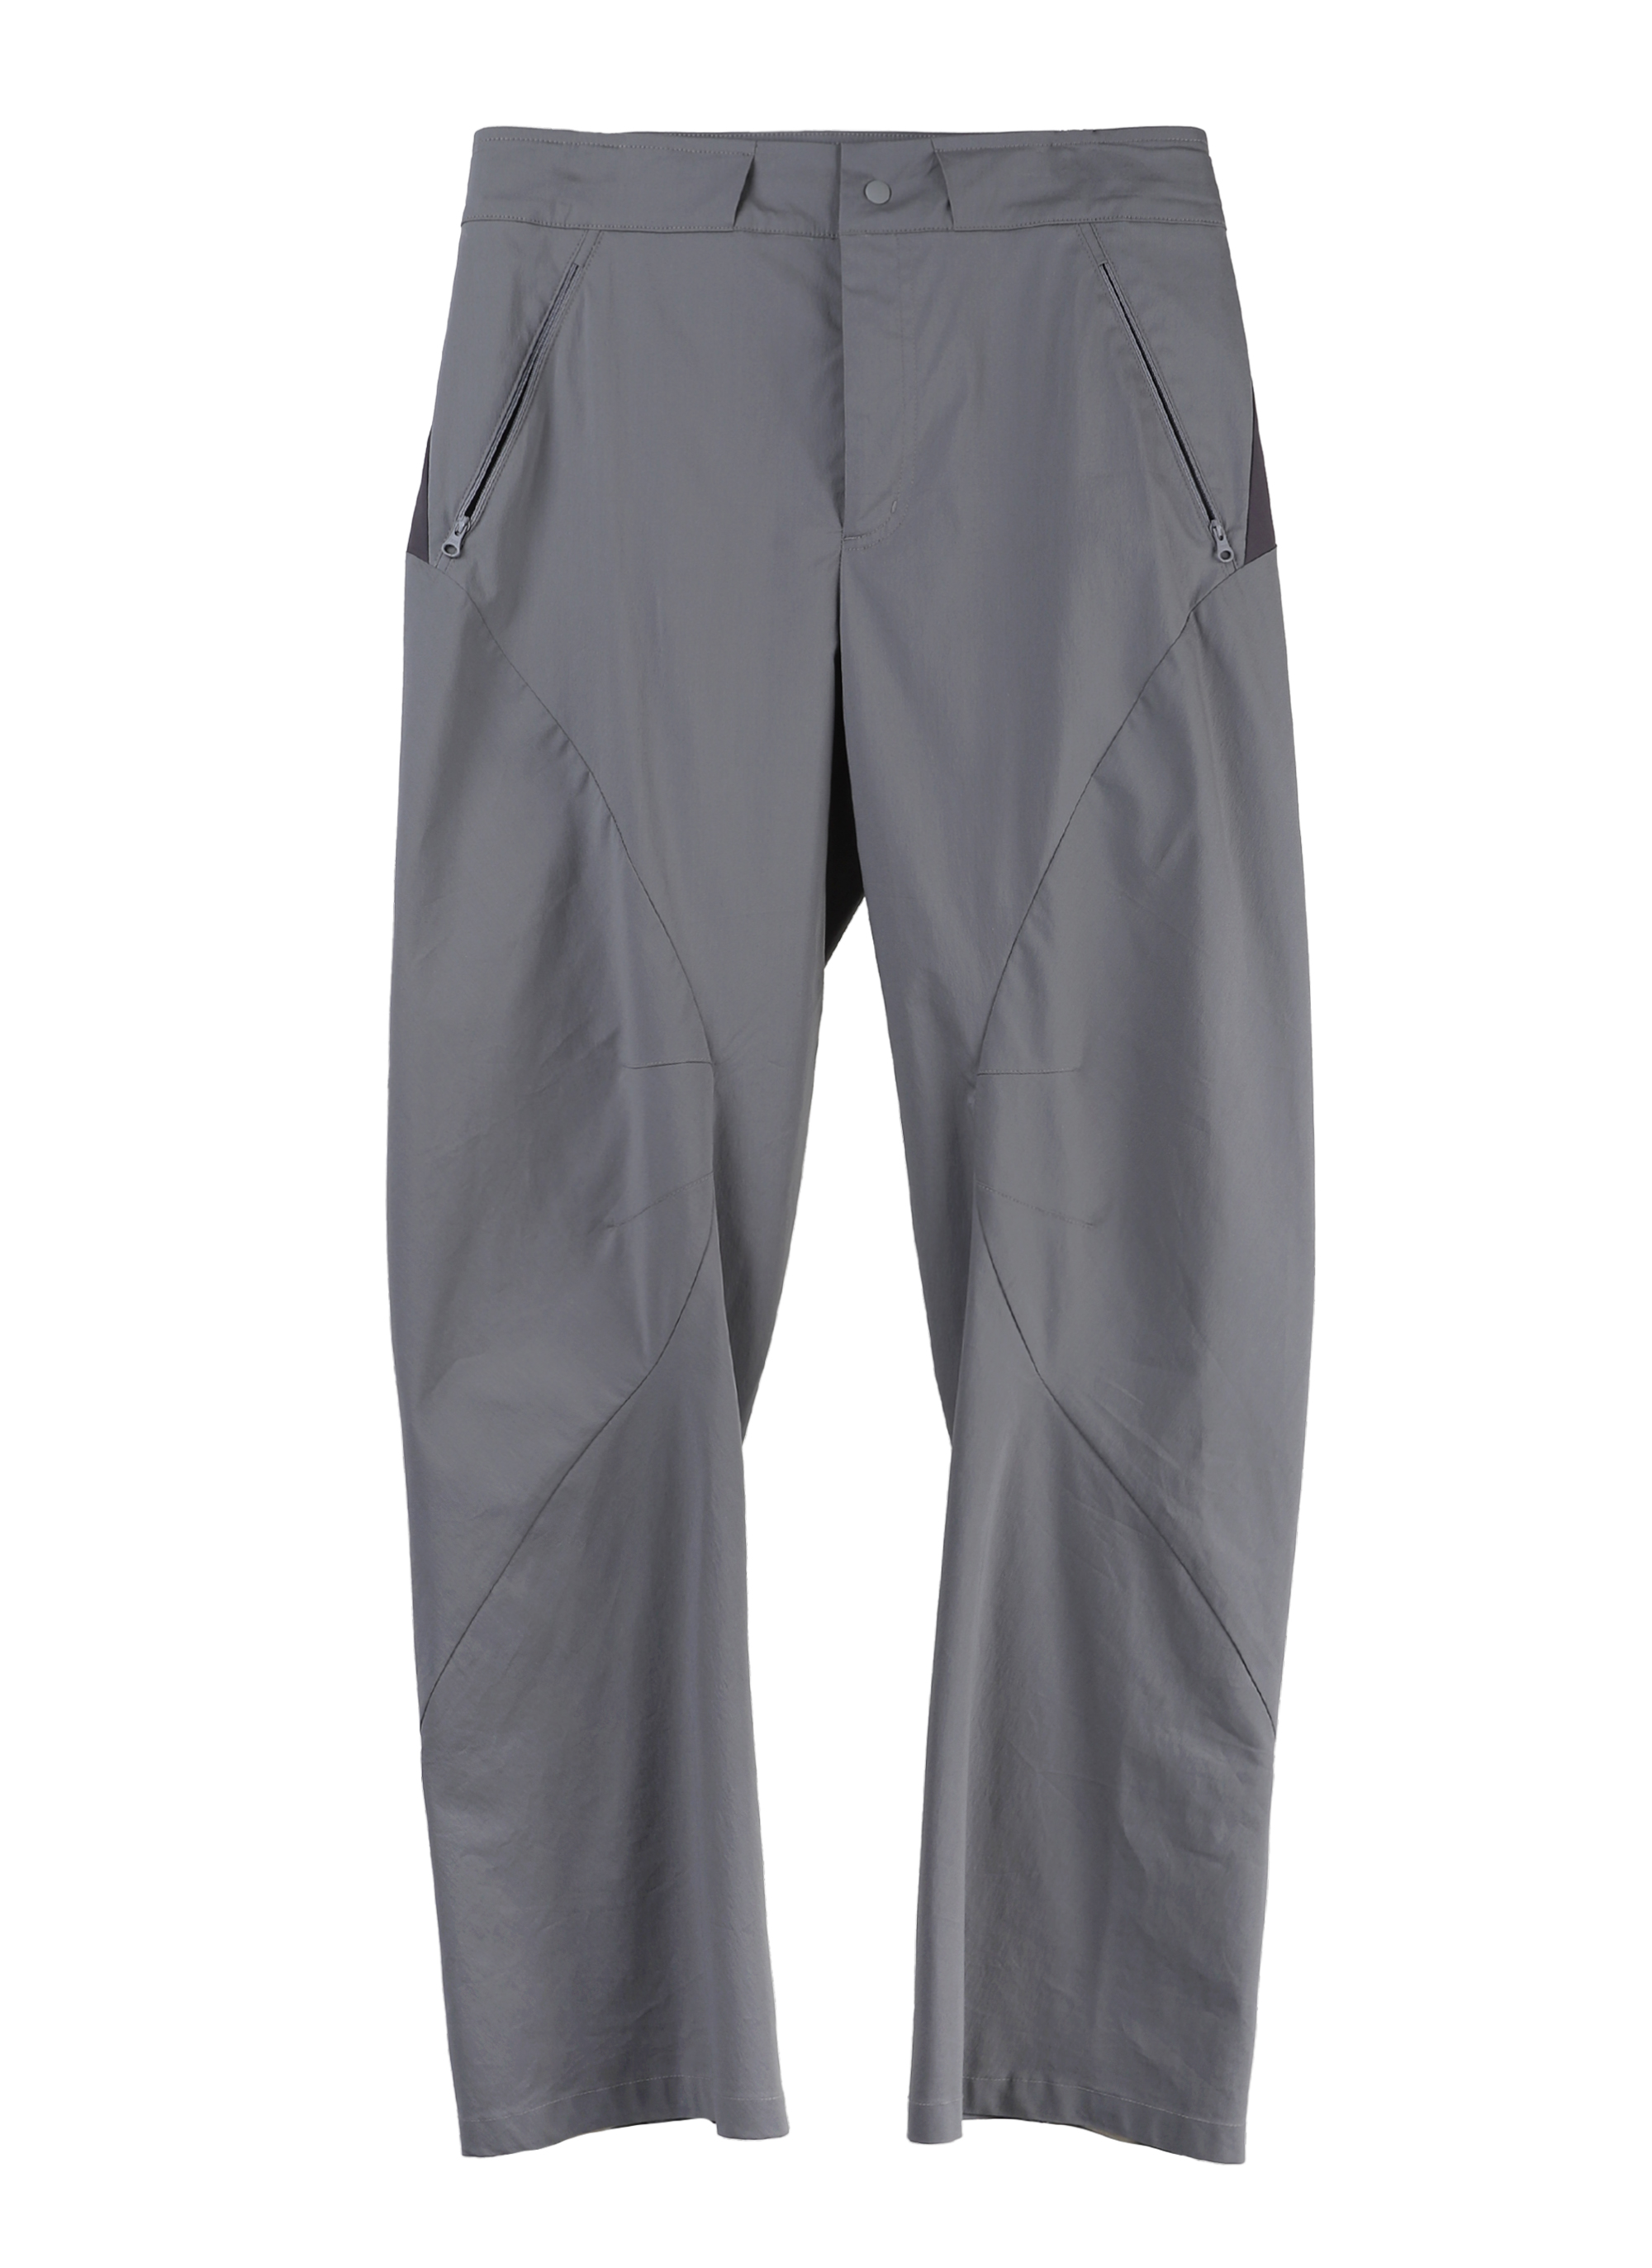 4.0 TECHNICAL PANTS RIGHT (GREY BLUE)